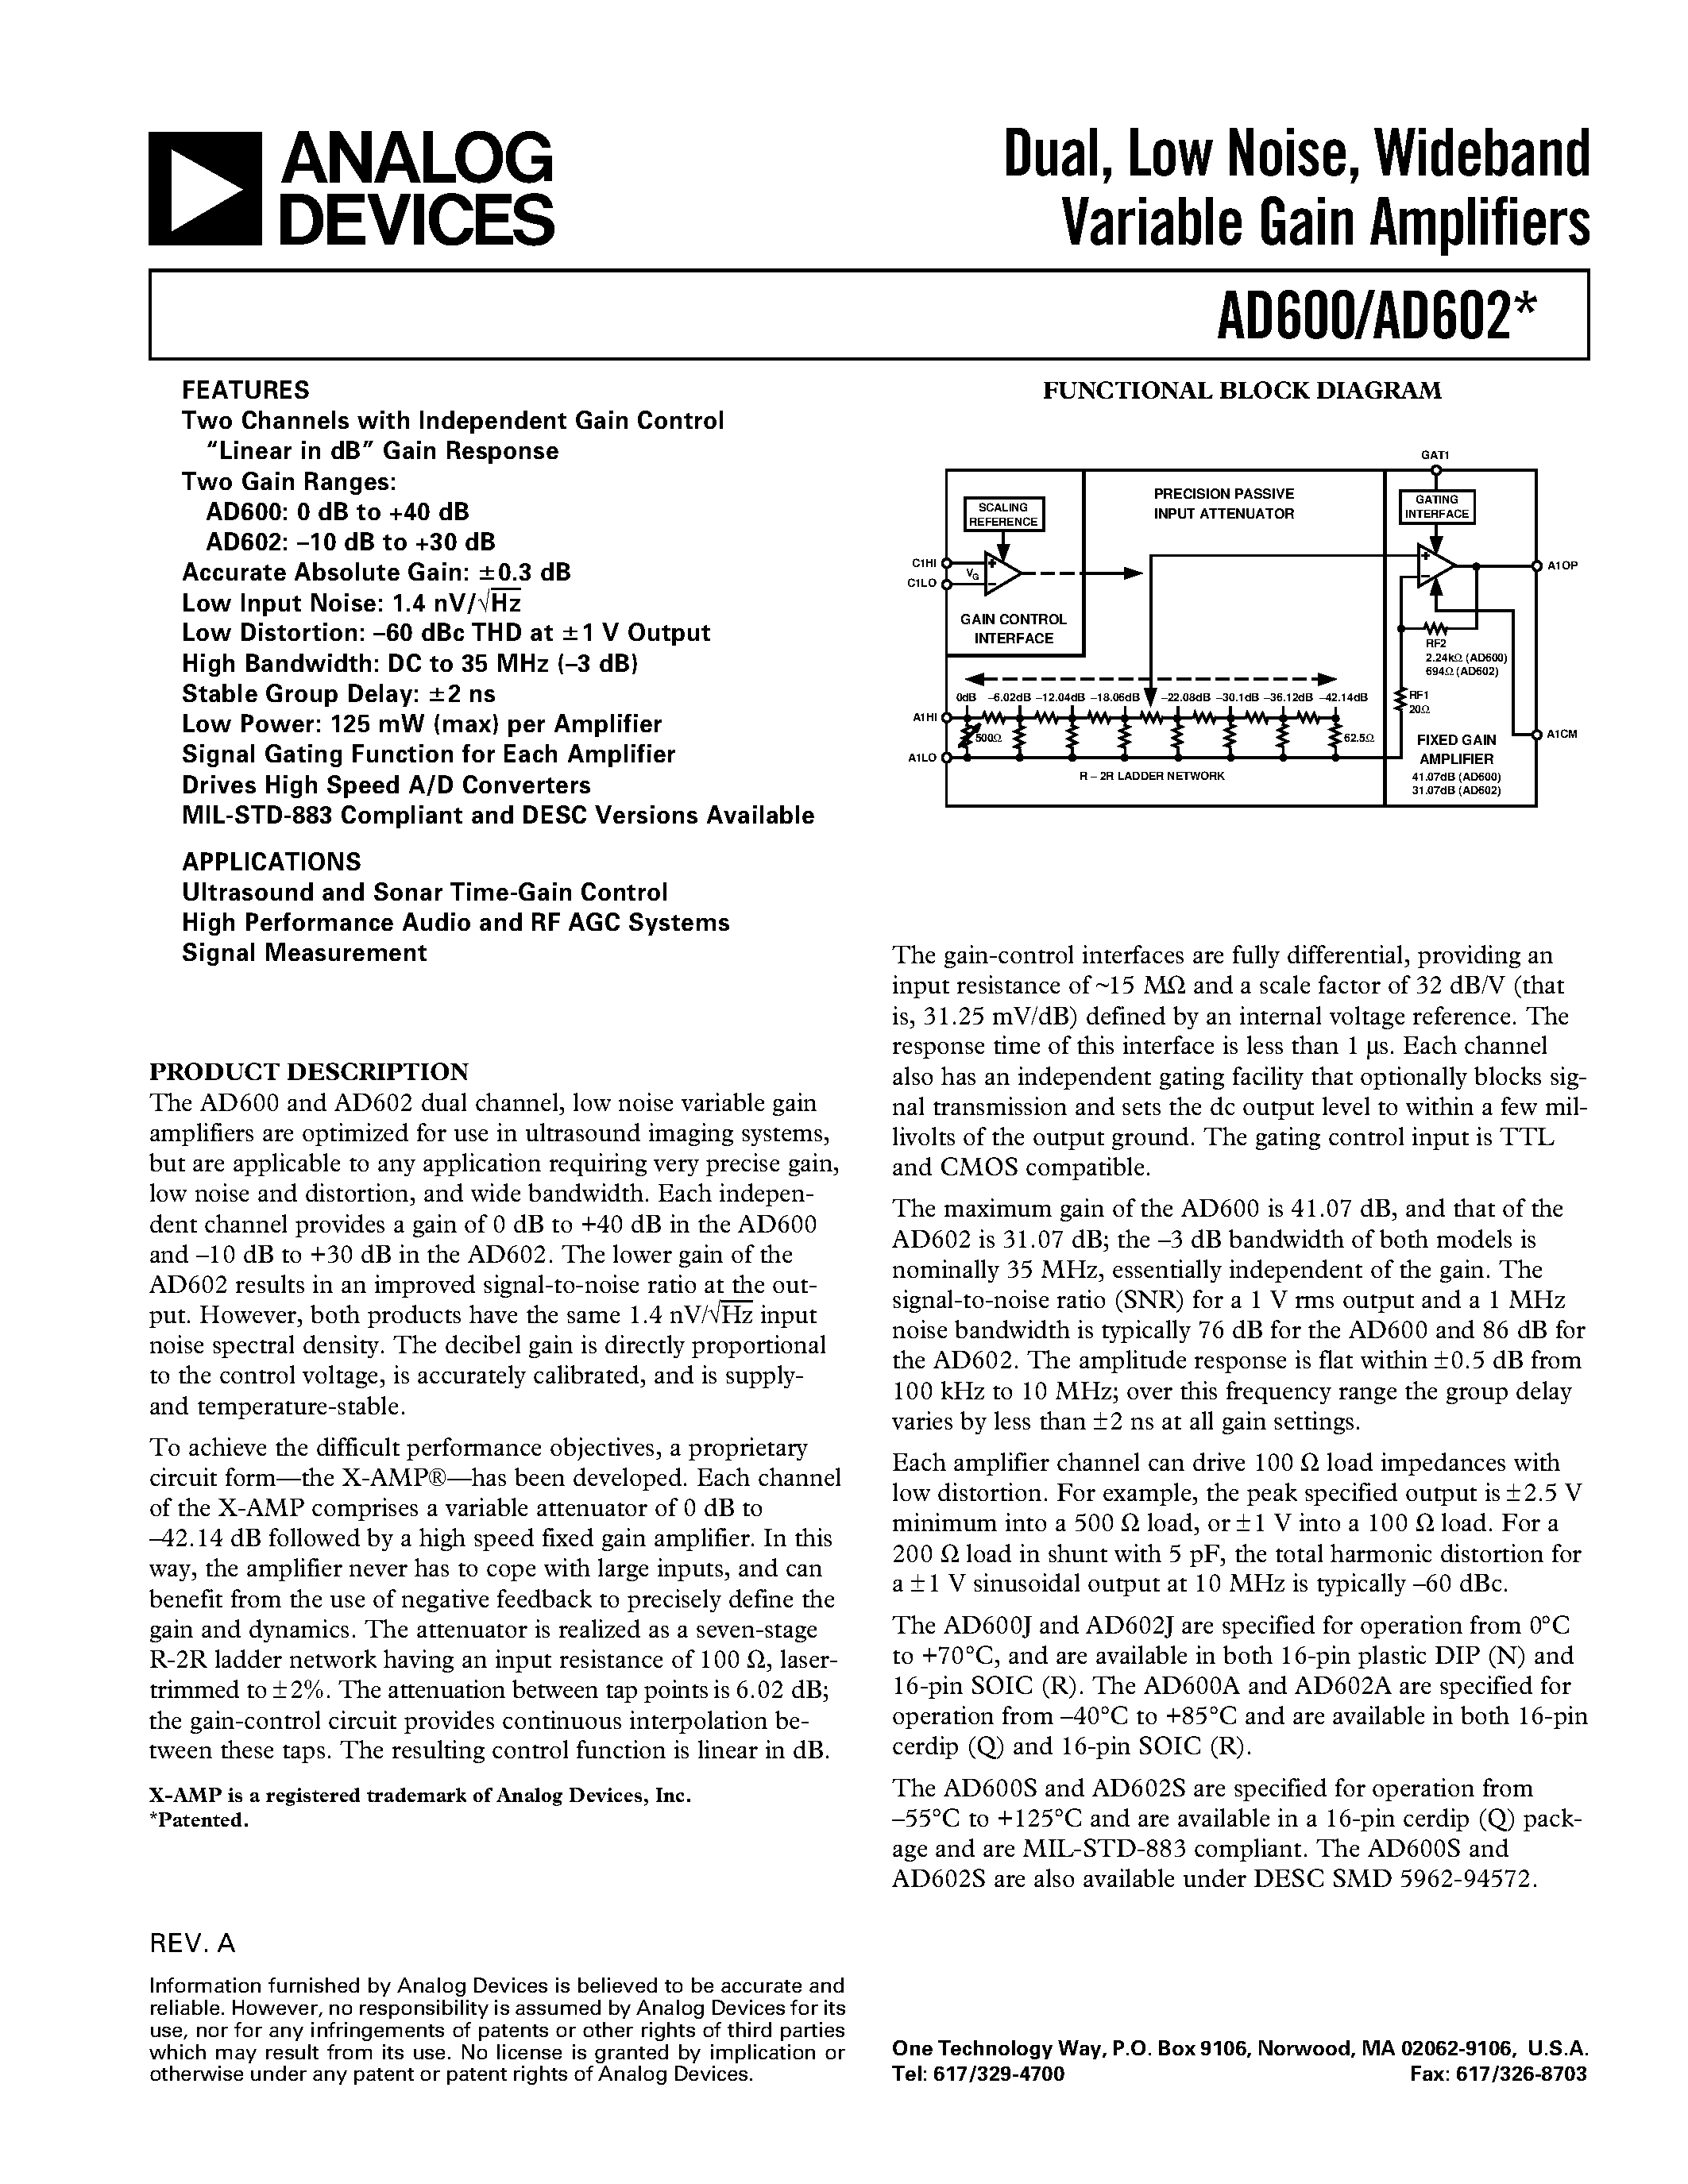 Datasheet AD883B3 - Dual/ Low Noise/ Wideband Variable Gain Amplifiers page 1